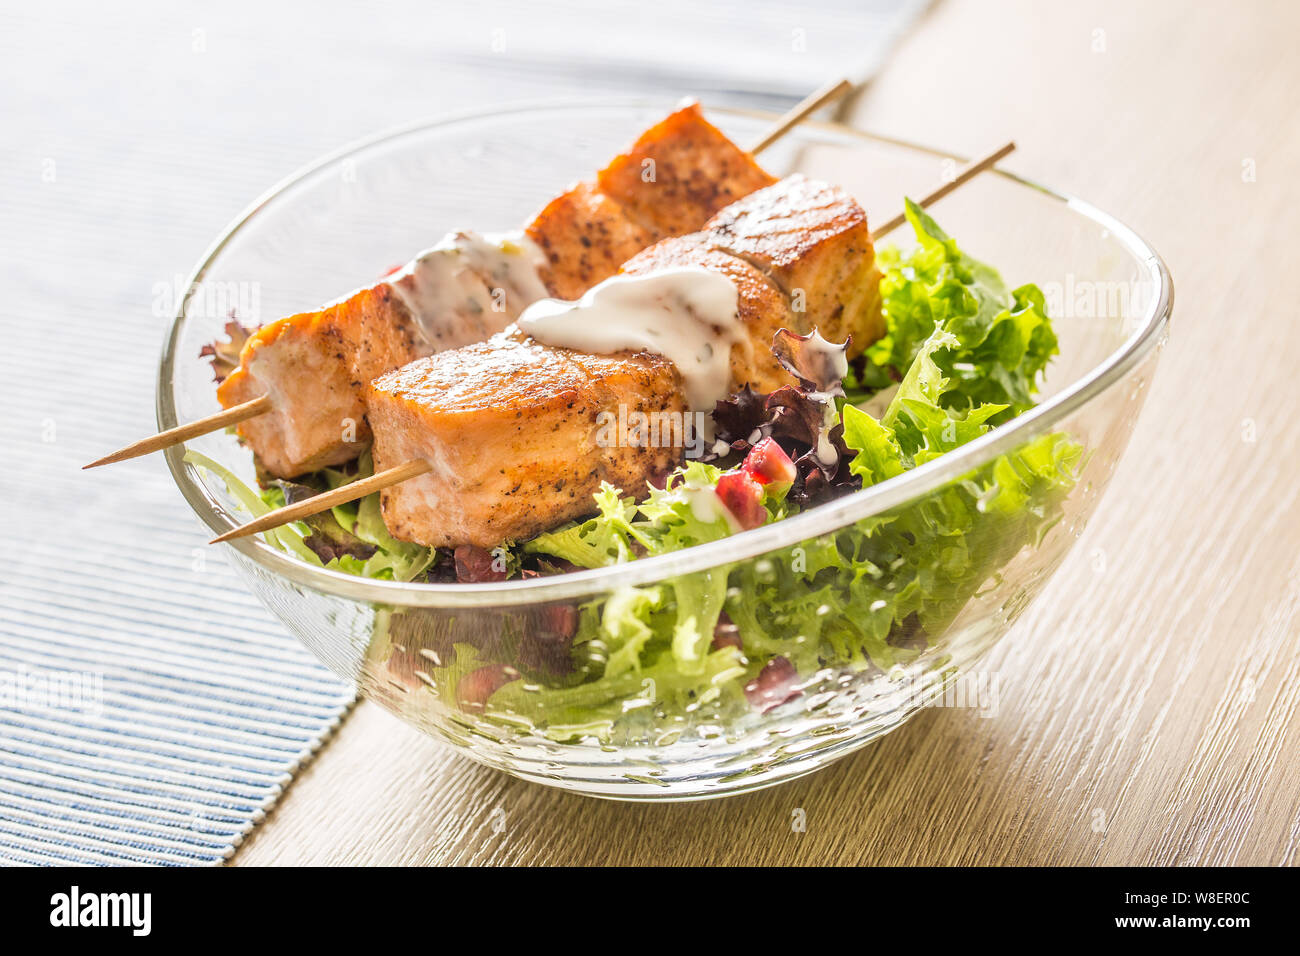 Grilled salmon skewers with summer lettuce salat pomehranate seeds olive oil and dressing. Healthy fish food with fruit and vegetable Stock Photo